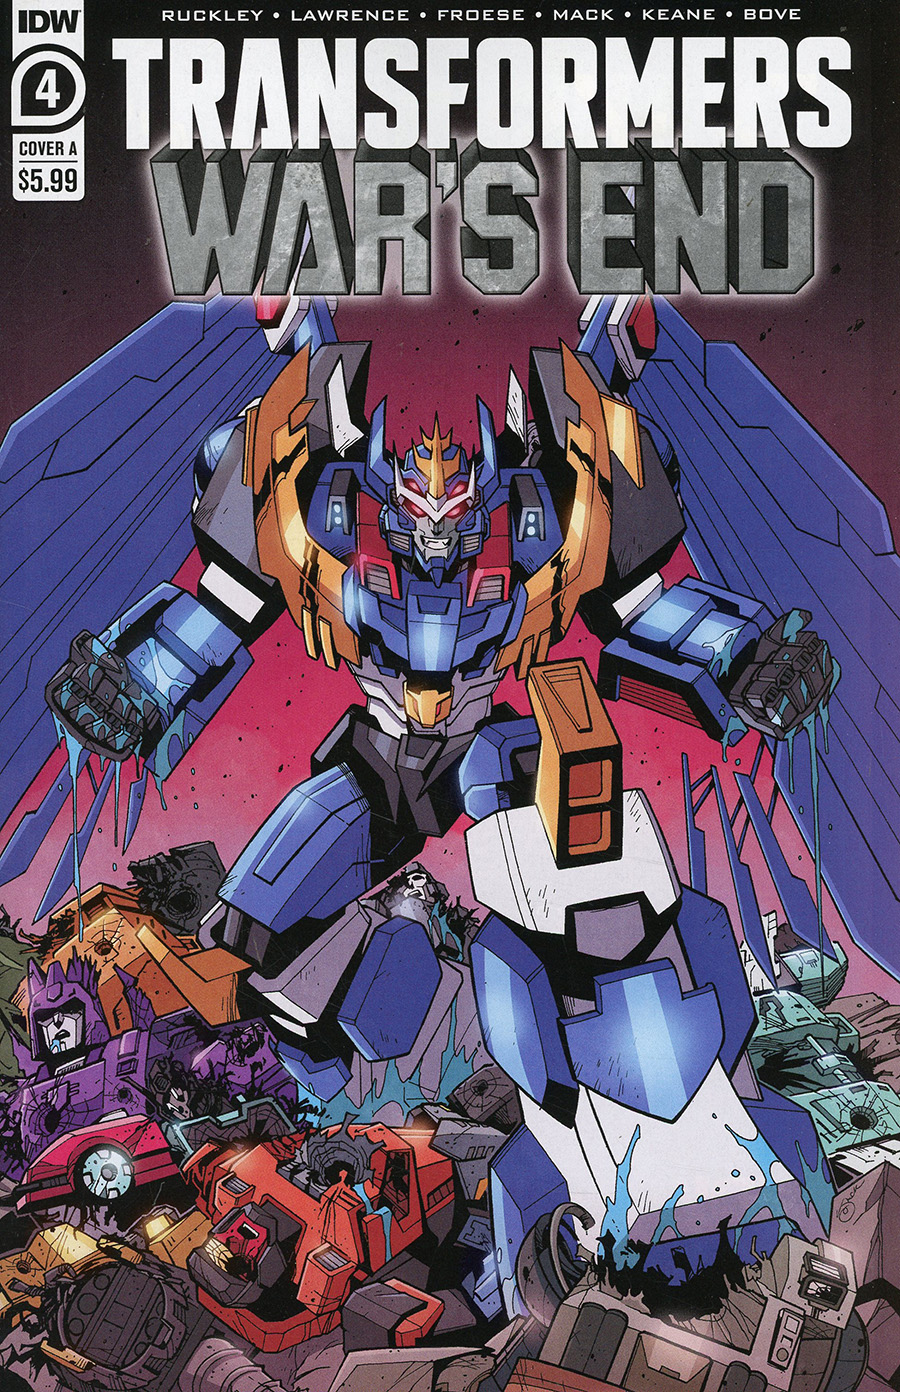 Transformers Wars End #4 Cover A Regular Jack Lawrence Cover